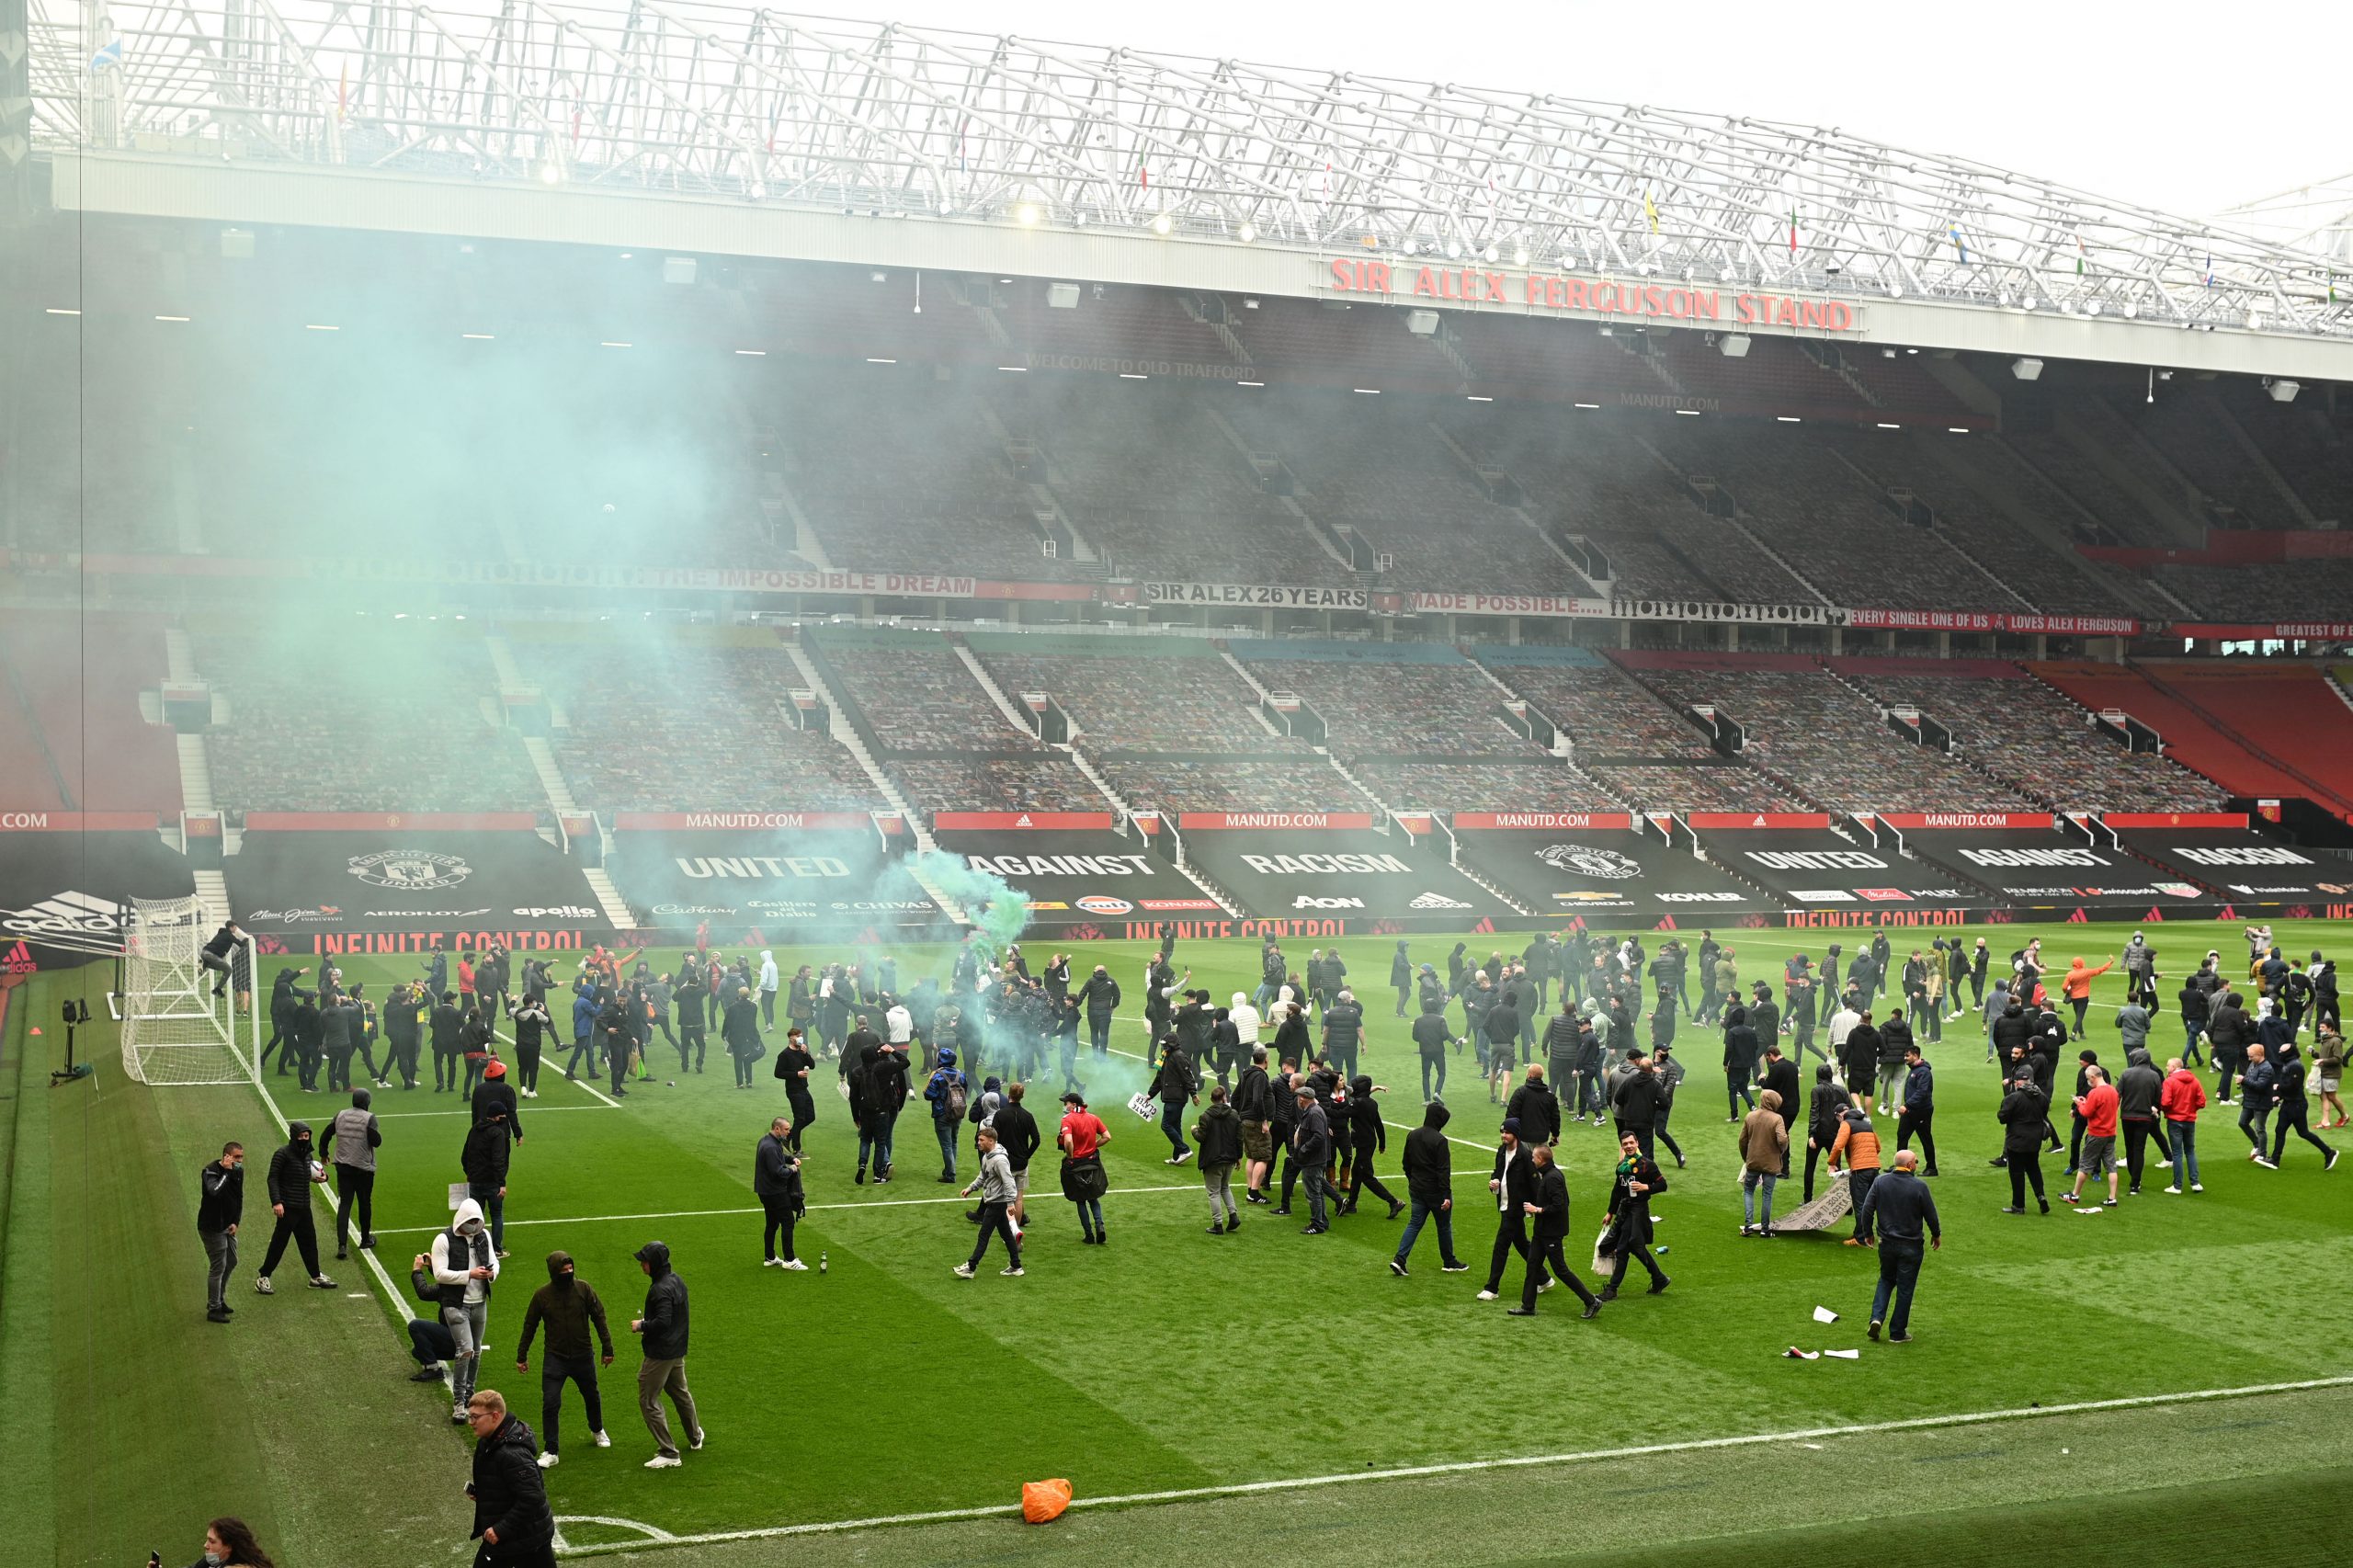 Man United vs Liverpool postponed over fans’ protest in Old Trafford